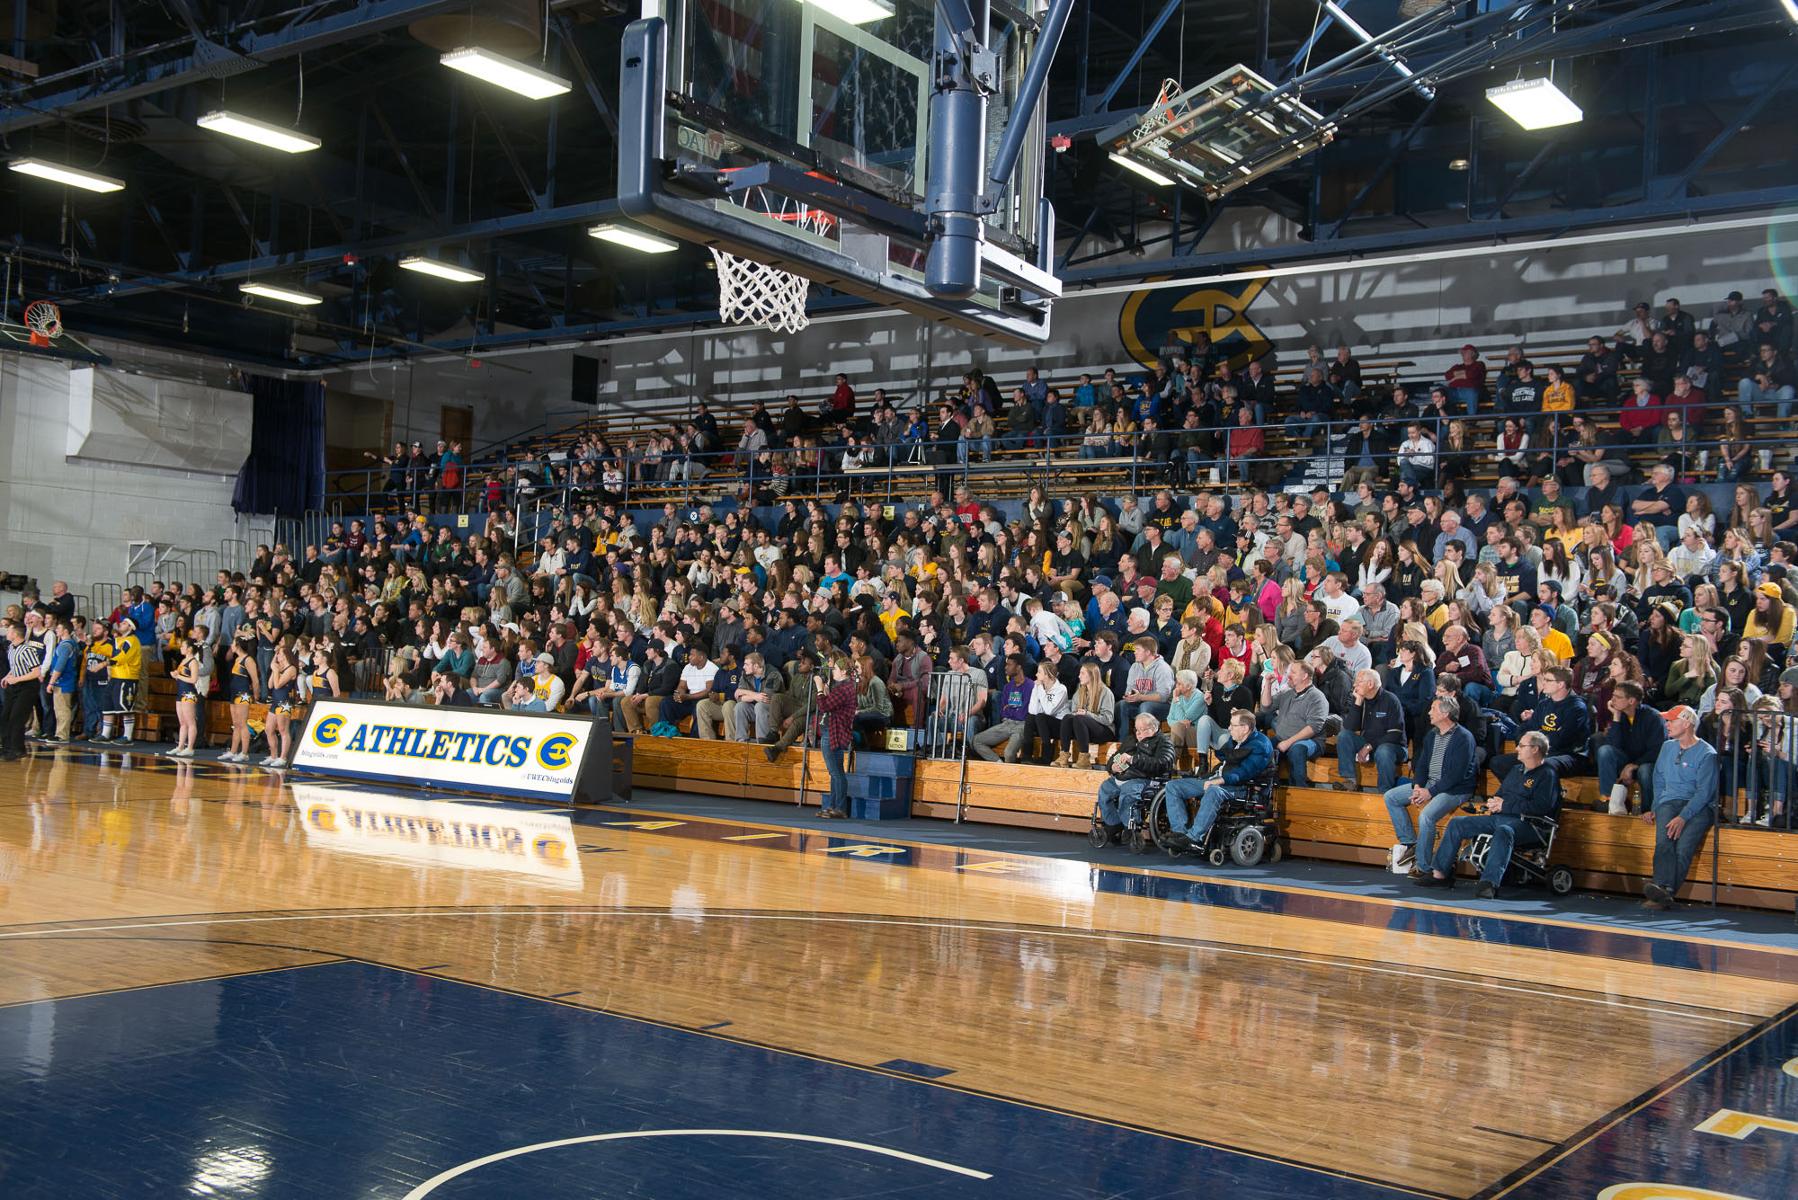 Basketball programs score high in Division III attendance